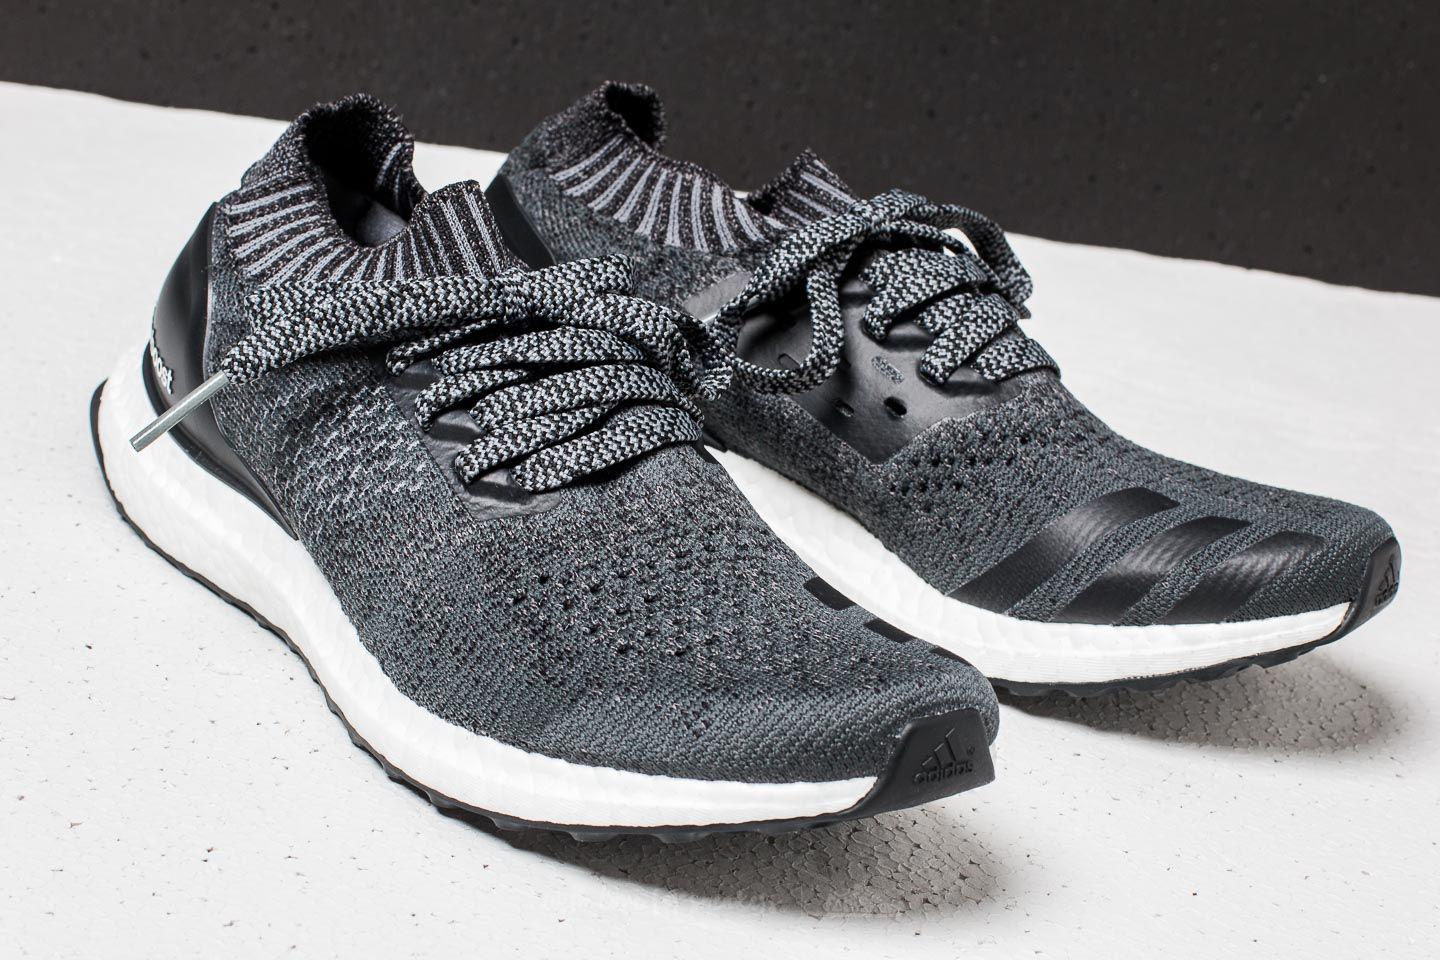 adidas ultra boost uncaged carbon core black & grey